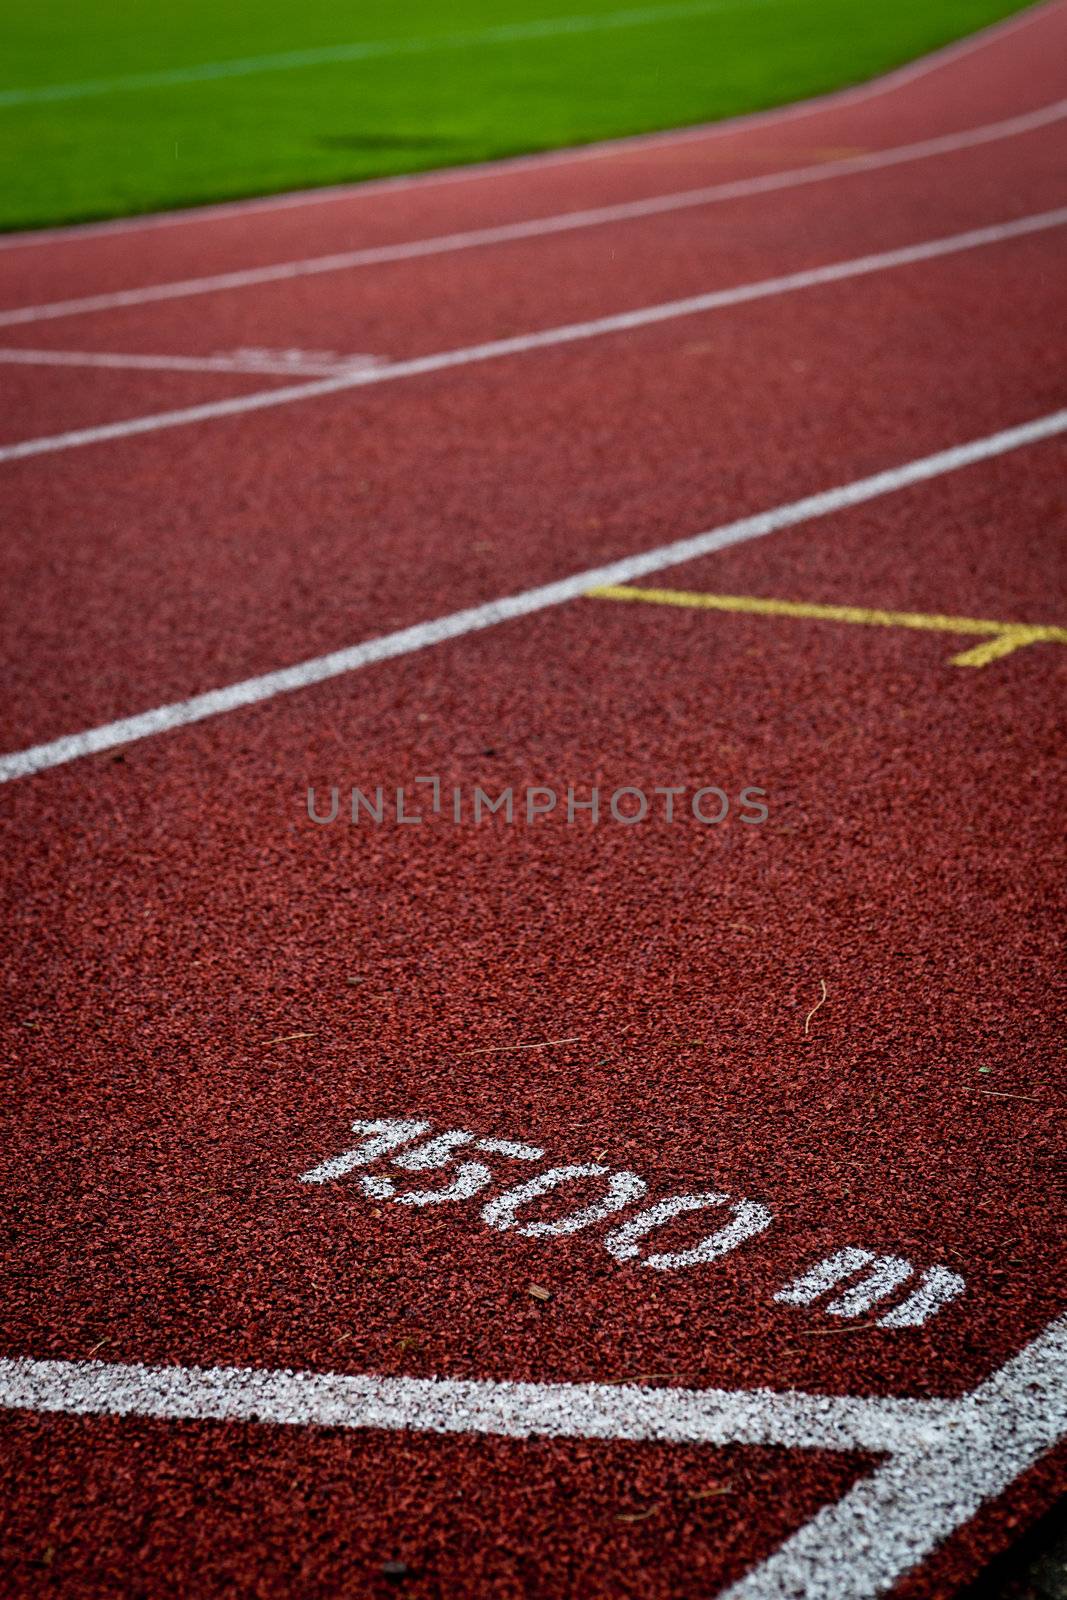 Sport grounds concept - Athletics Track Lane Numbers  by viktor_cap